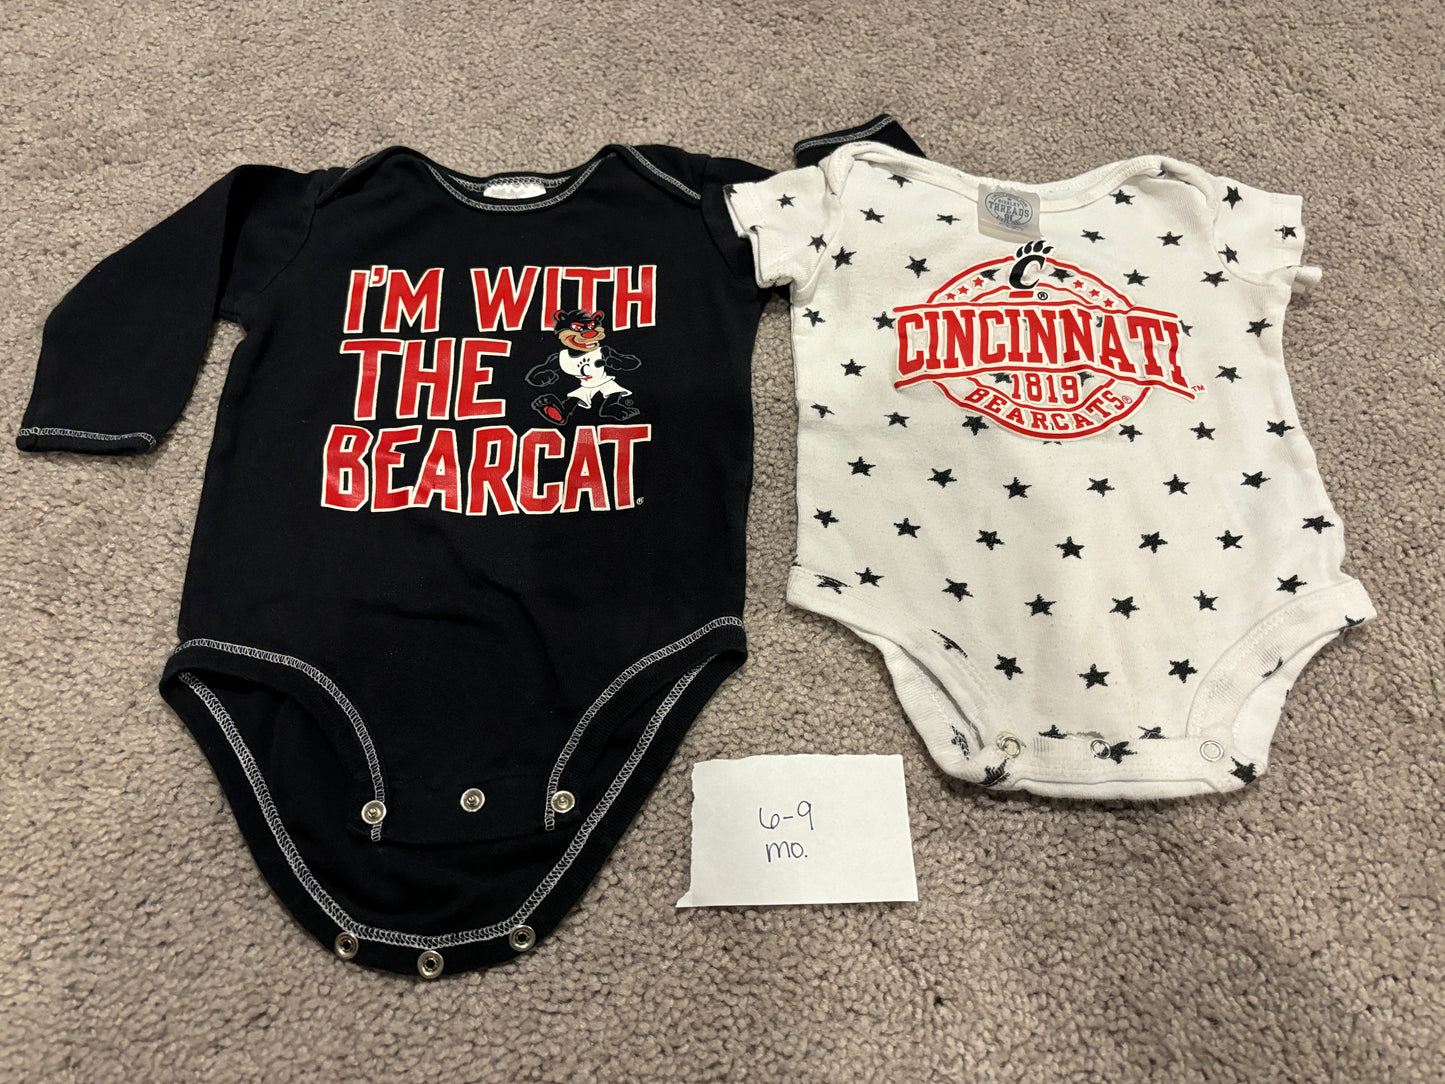 6-9 Mo -  - 2 Pack UC Onesies (LS Black and SS White) - PU 45236 Except Semiannual Sale